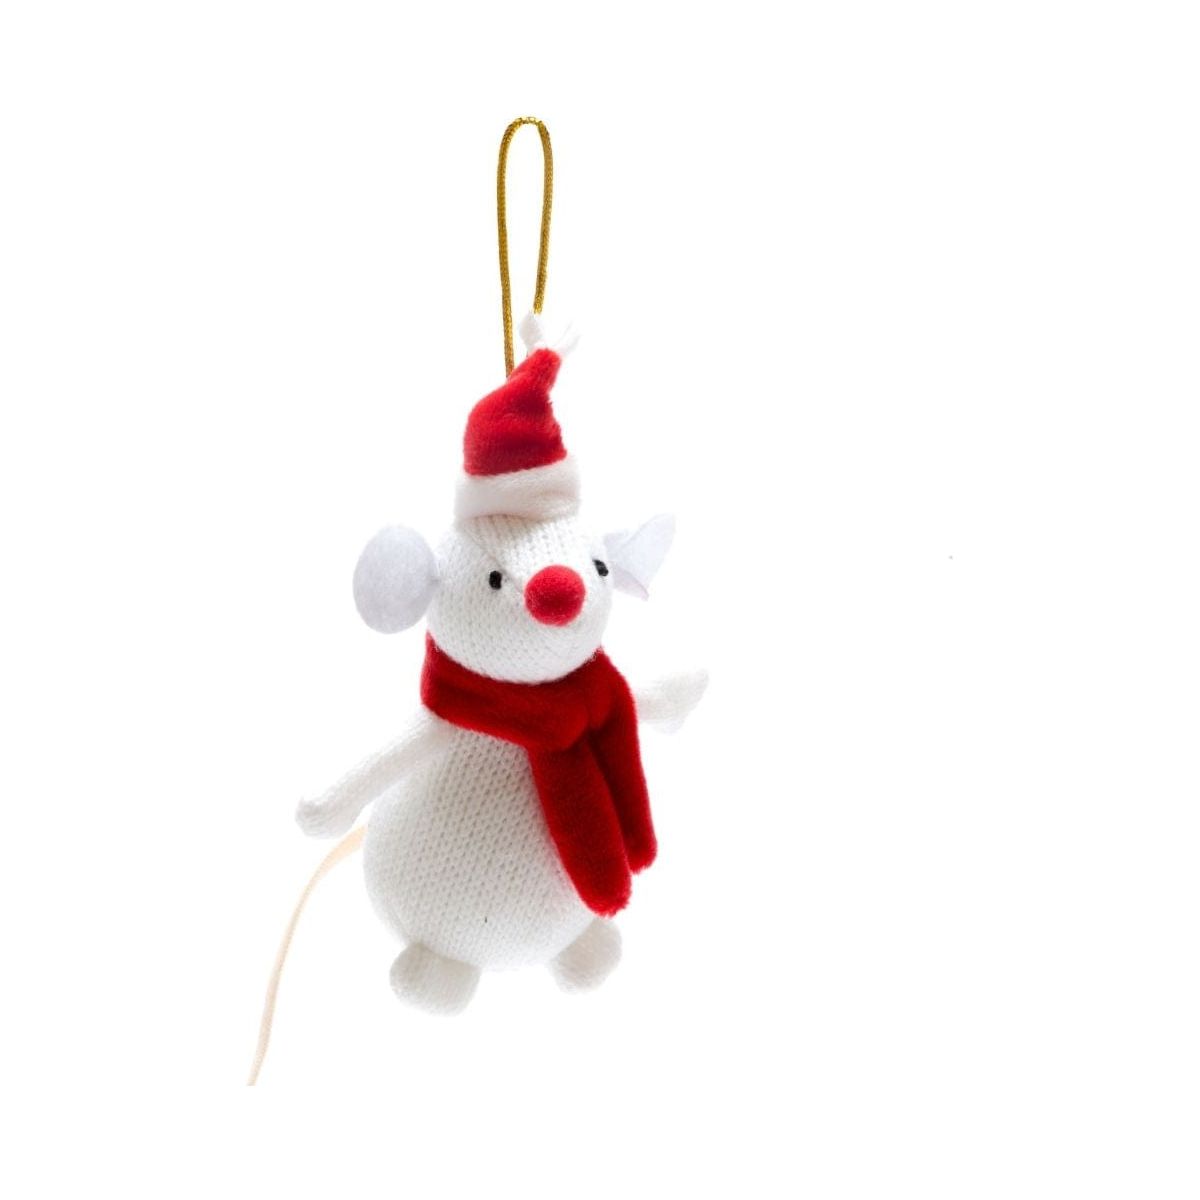 Best Years Ltd Knitted White Mouse Christmas Decoration